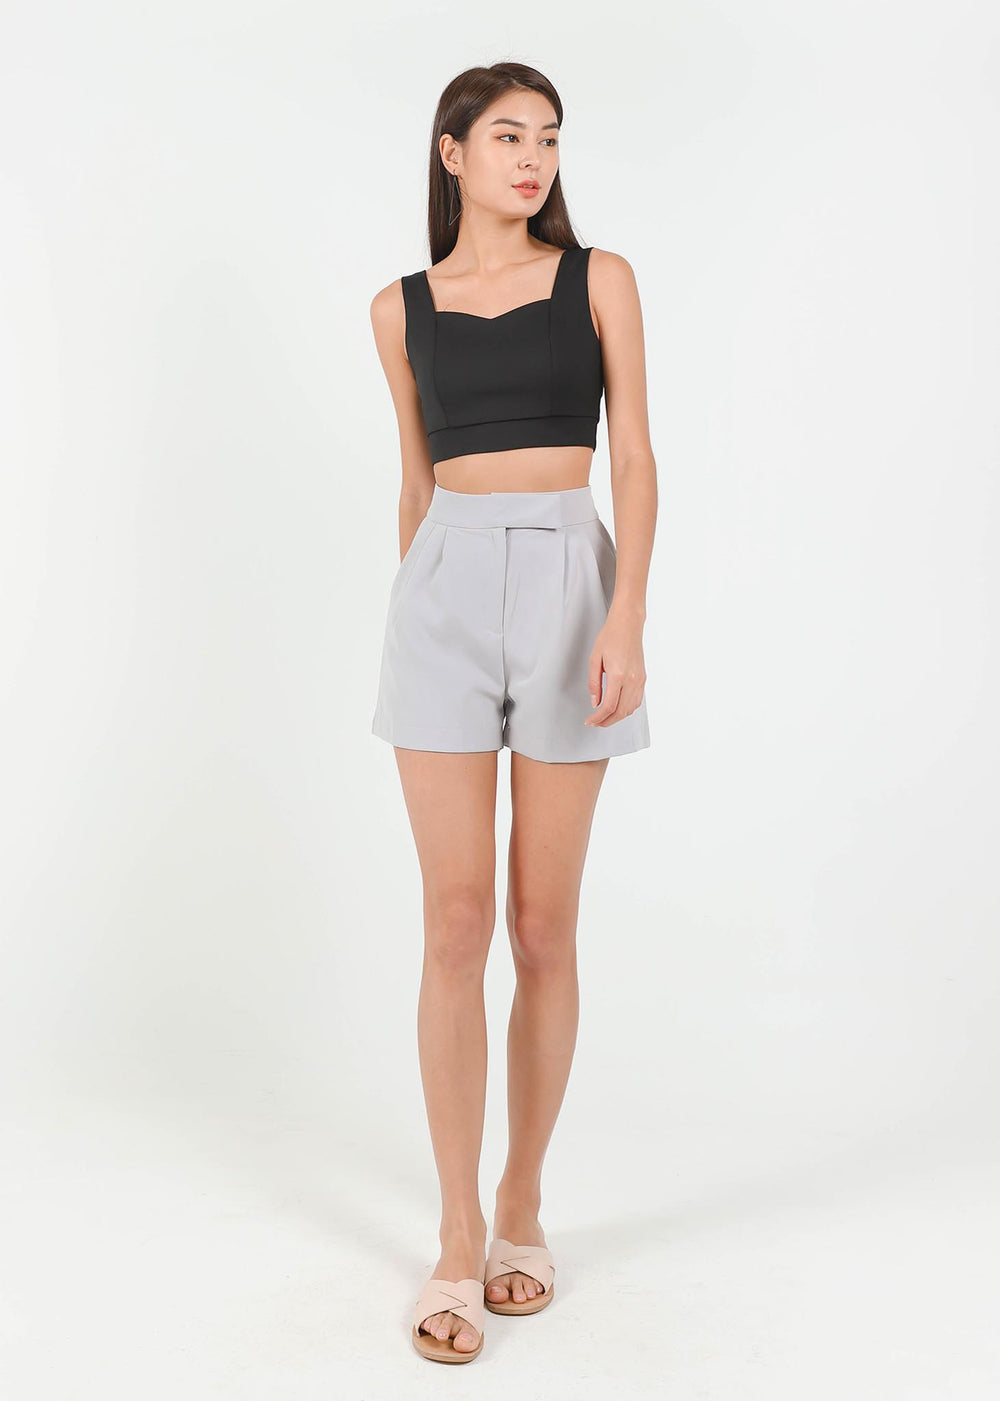 Buckle It Up Highwaisted Shorts in Lilac Grey #6stylexclusive